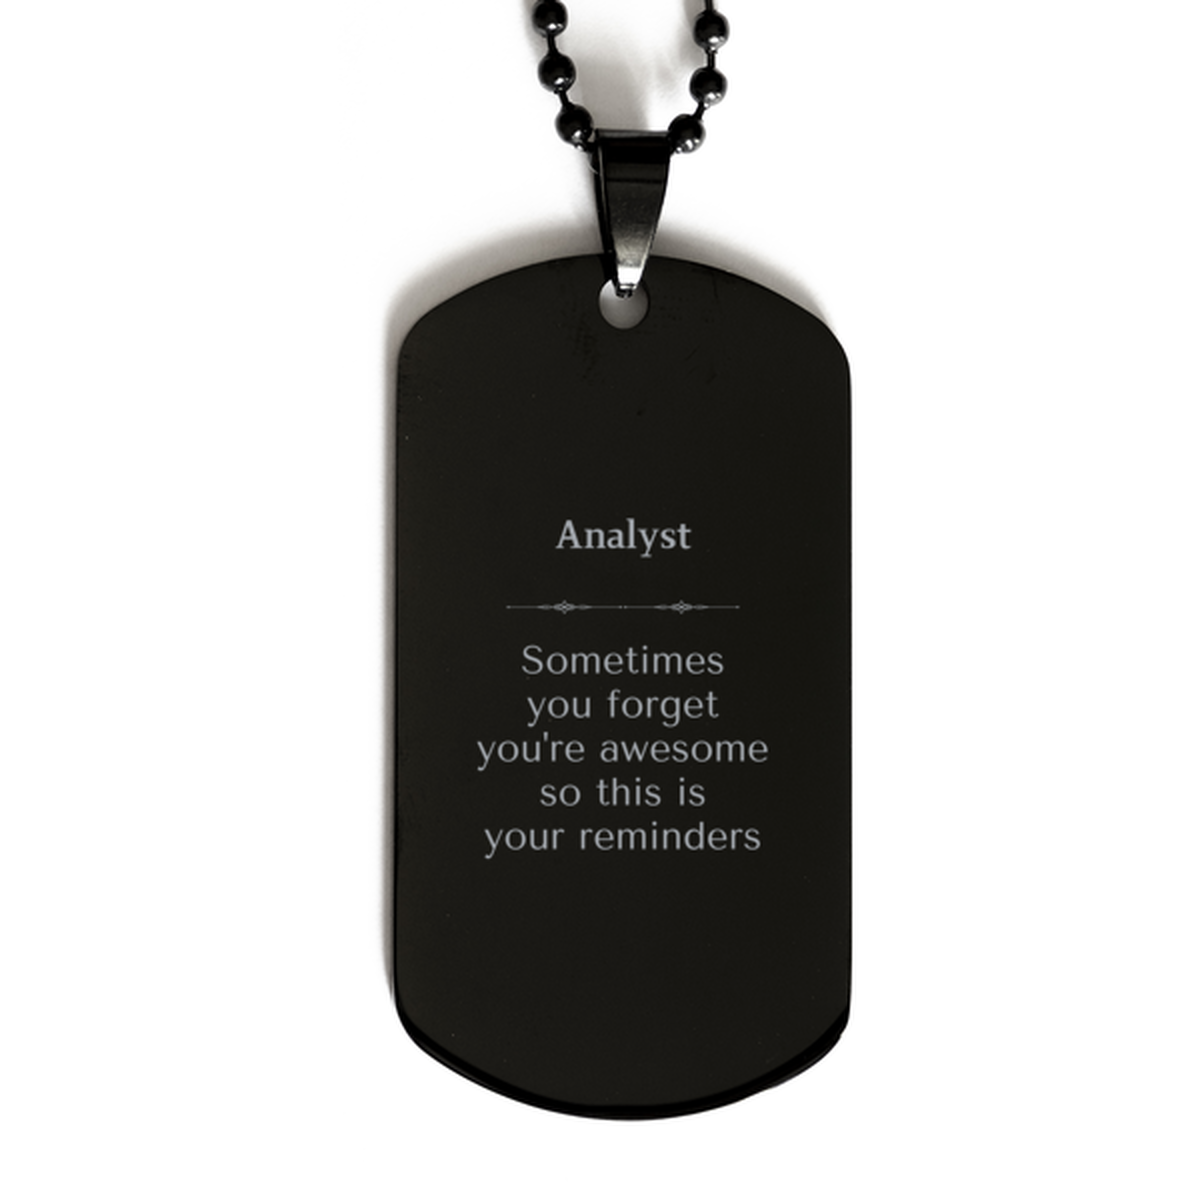 Sentimental Analyst Black Dog Tag, Analyst Sometimes you forget you're awesome so this is your reminders, Graduation Christmas Birthday Gifts for Analyst, Men, Women, Coworkers